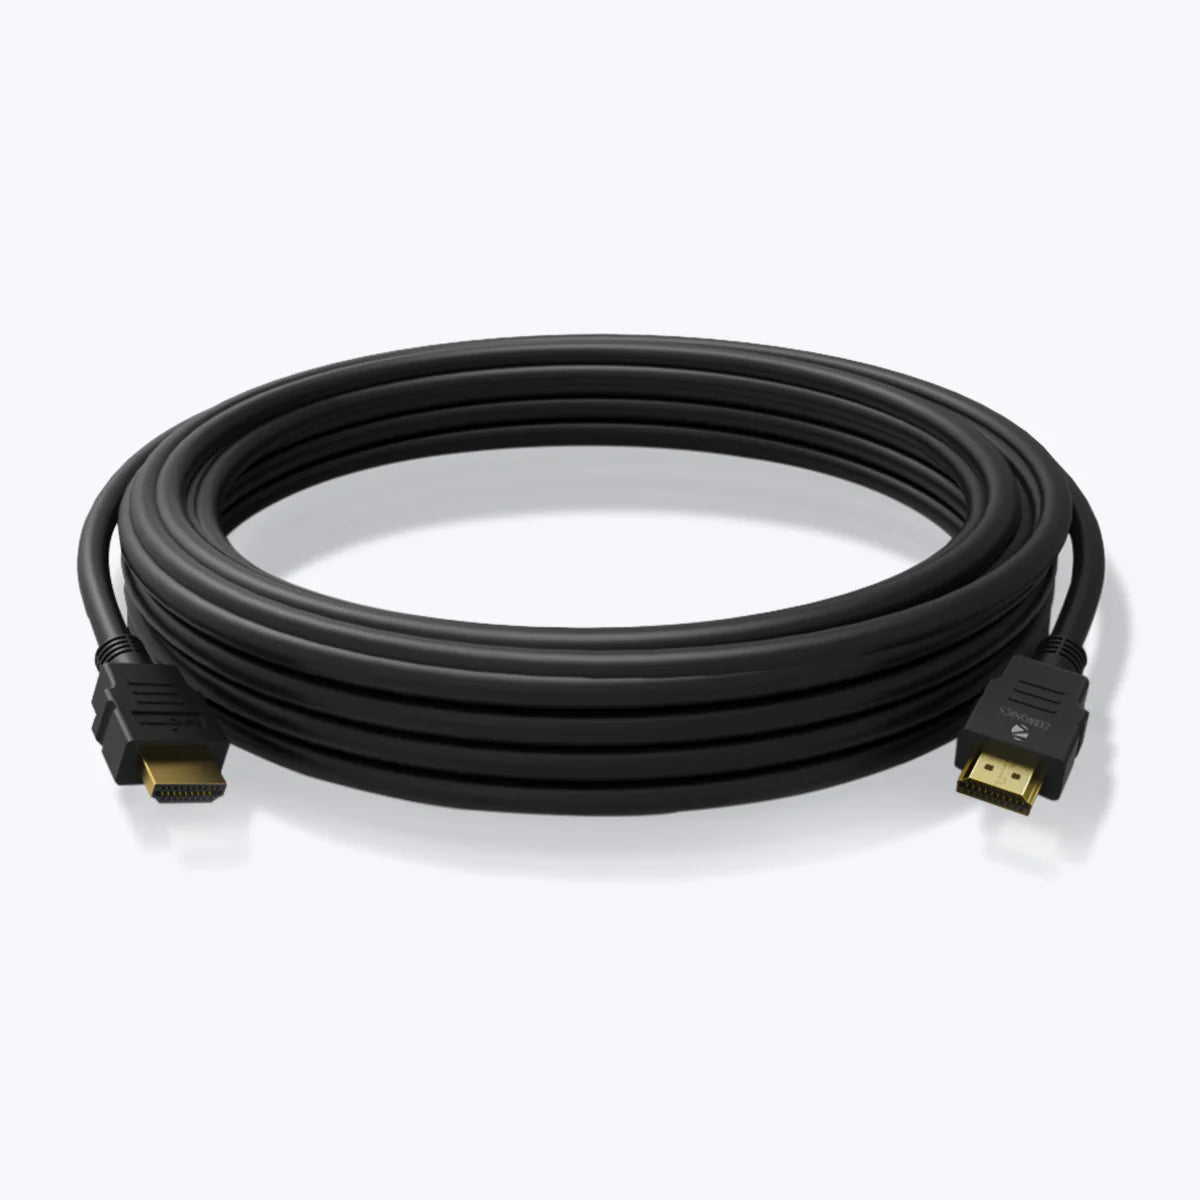 ZEB-HAA1520 (1.5 Meter) HDMI Cable